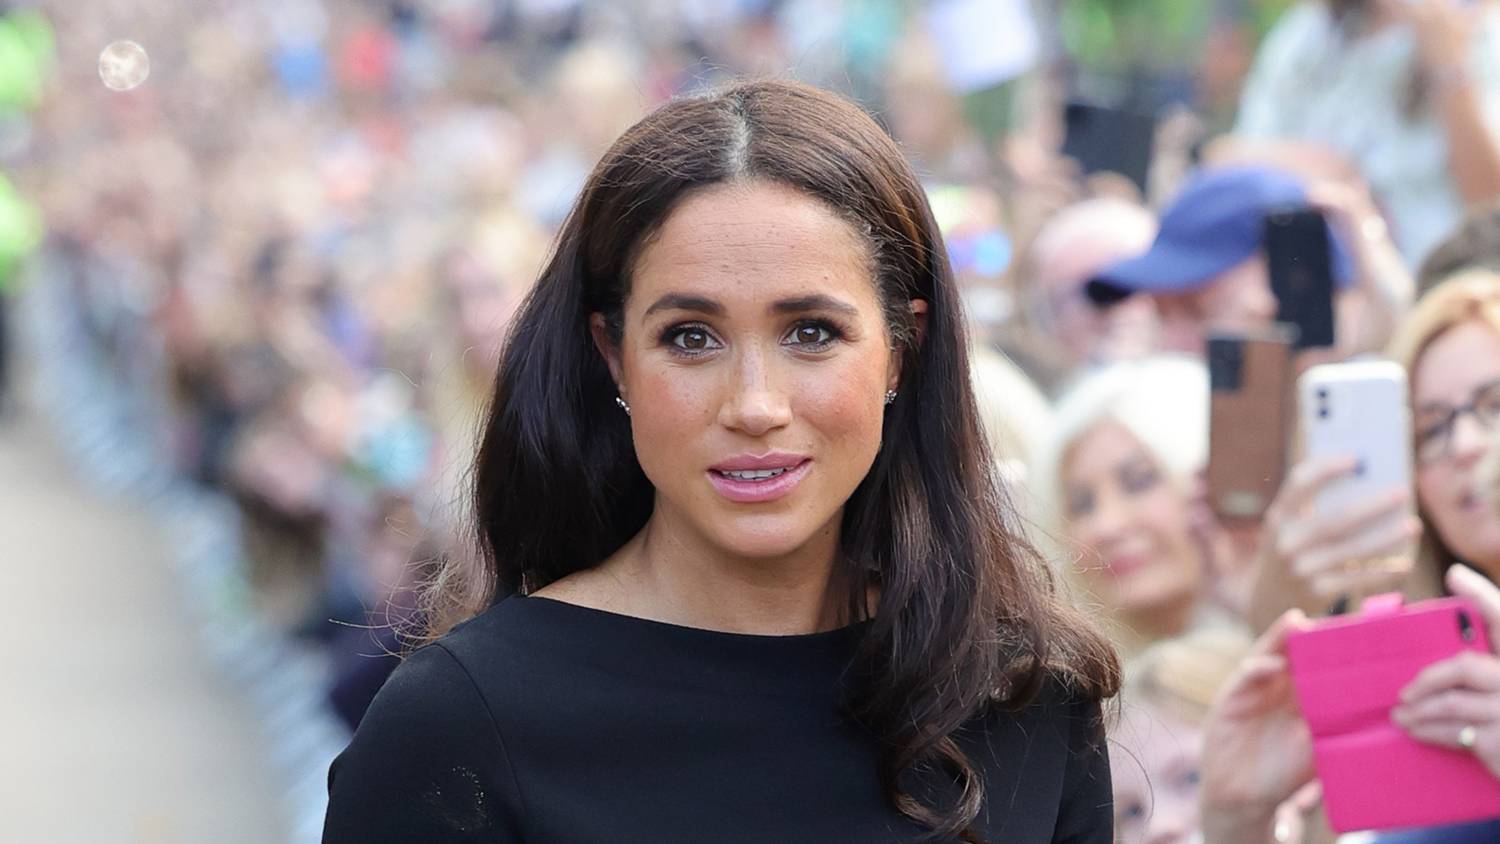 Velvet – Celeb – Meghan Markle, who advocates environmental protection, comes with a real gasoline guzzler